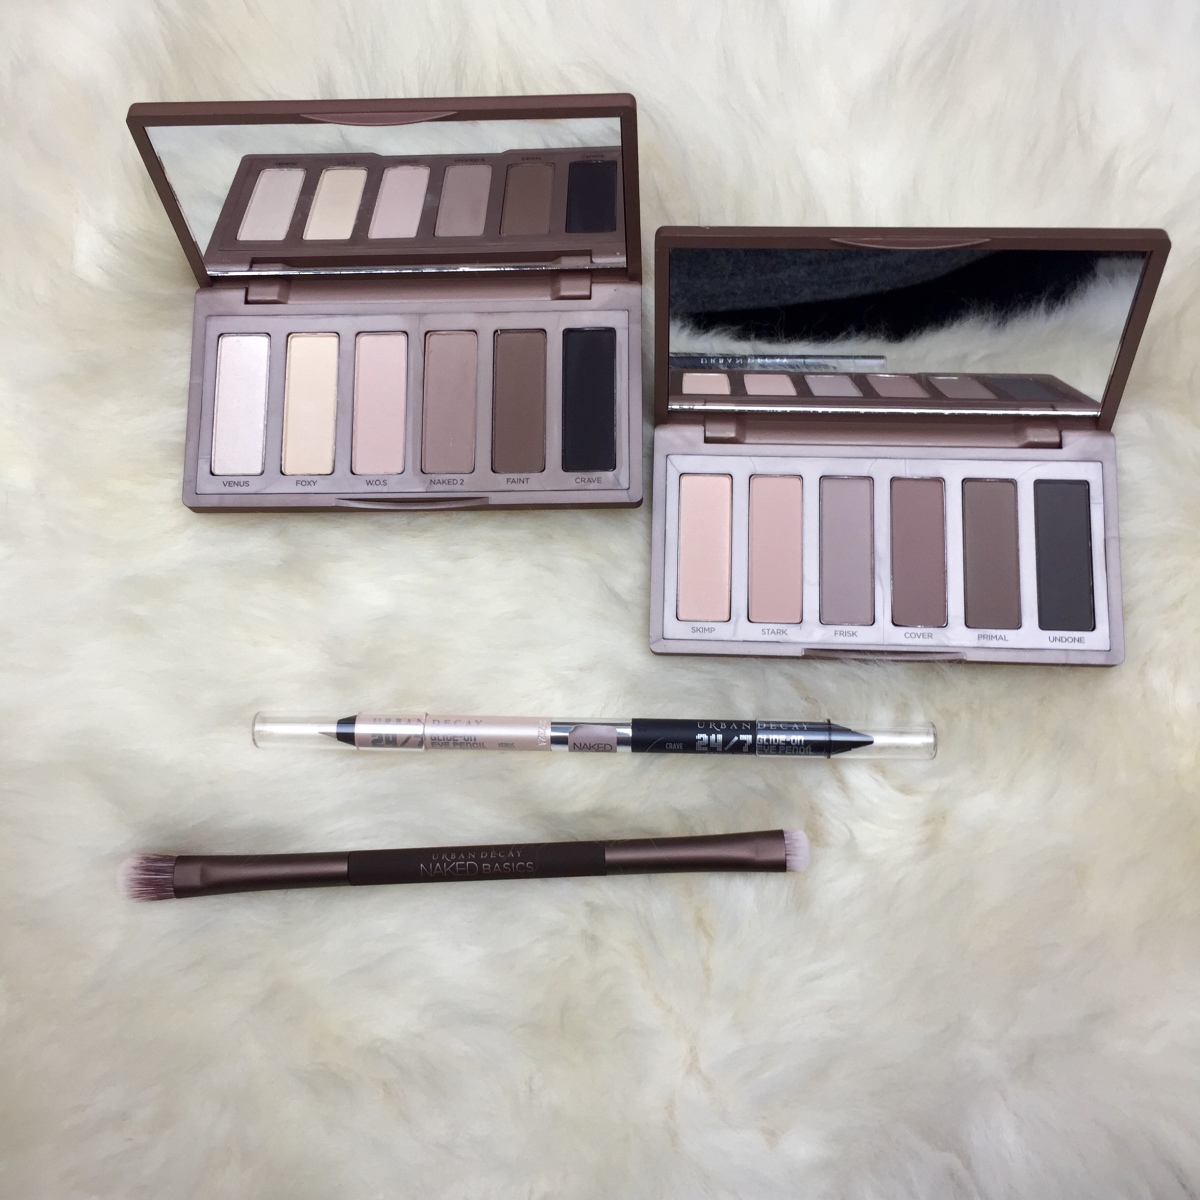 New: The Urban Decay Naked2 Basics Palette